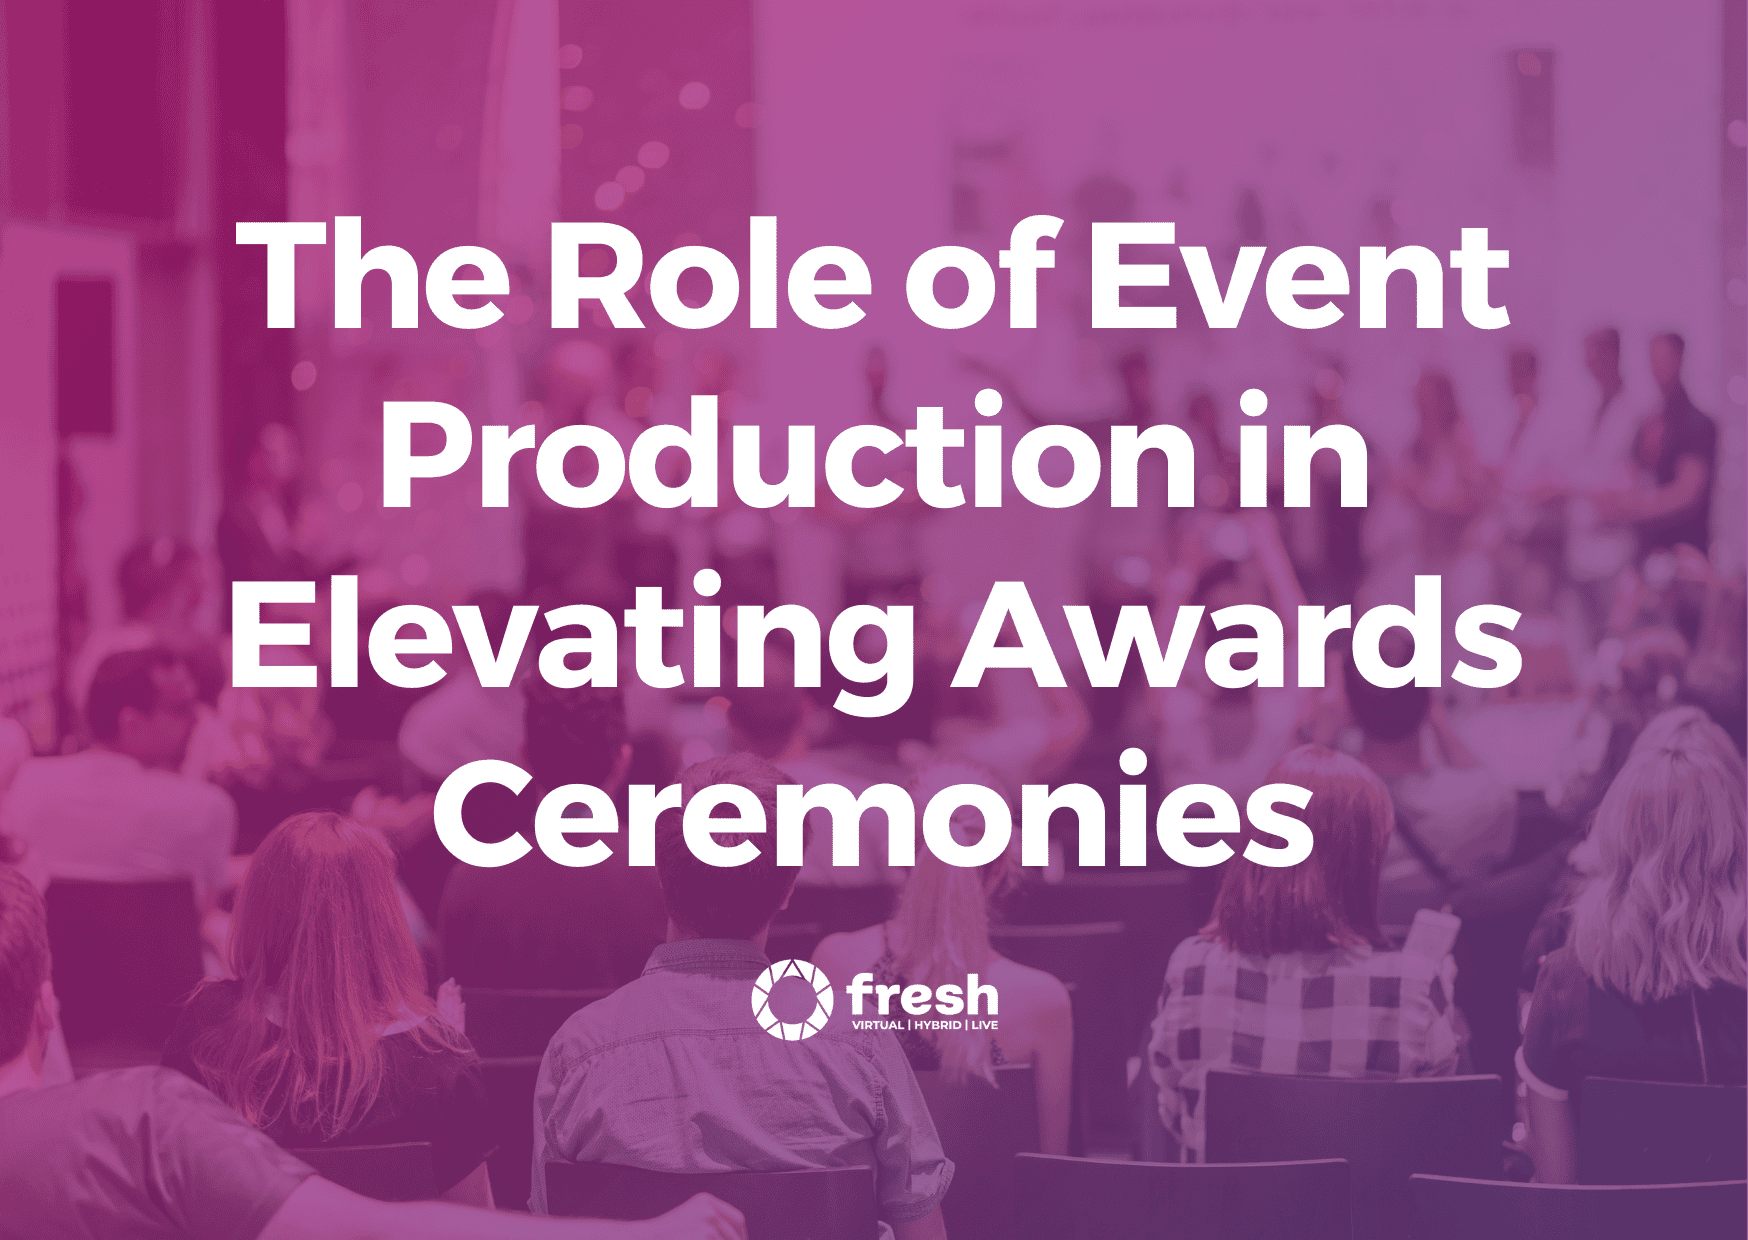 Event production for awards ceremonies